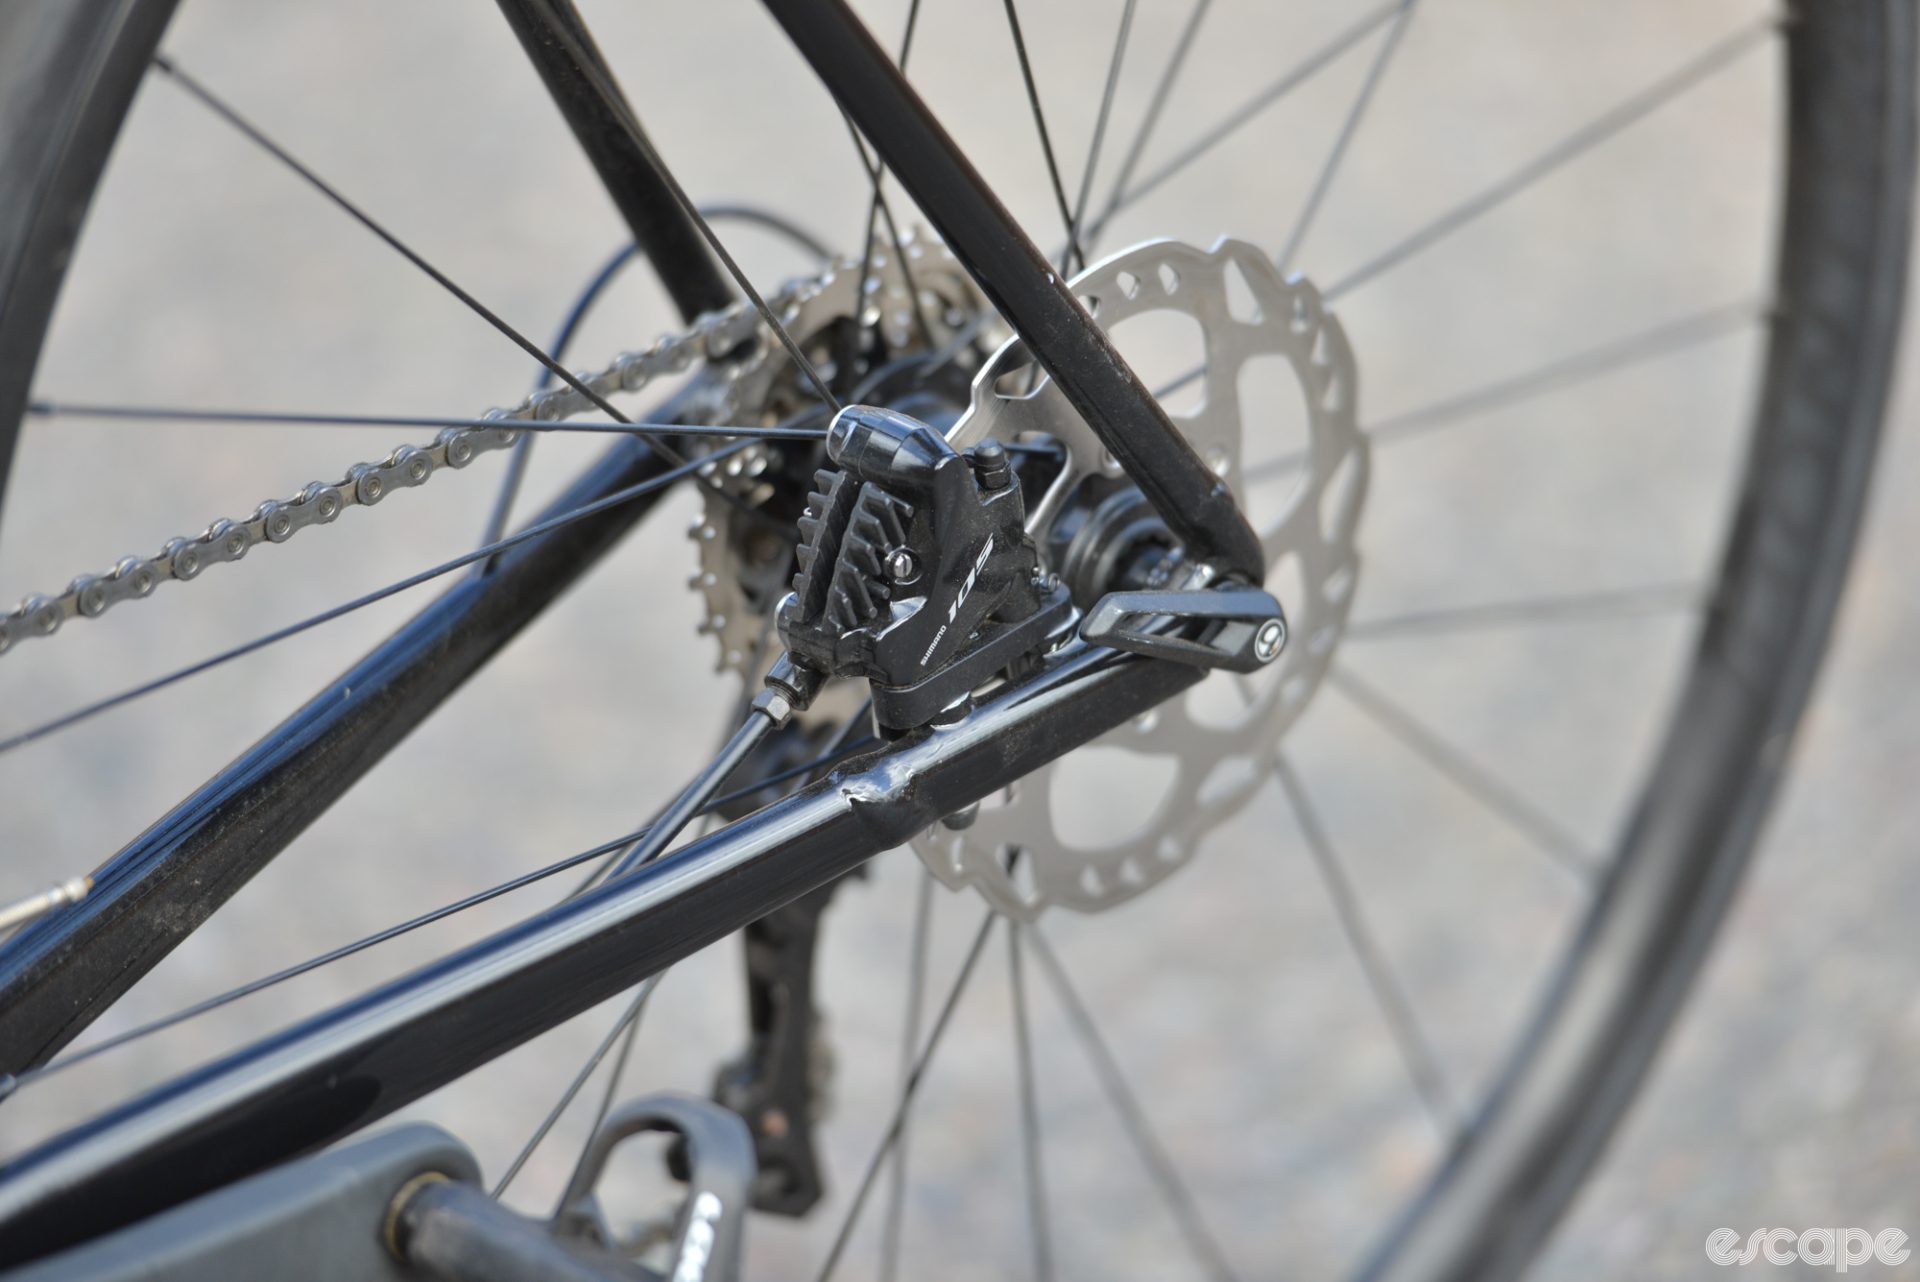 The rear triangle of the Emonda ALR, showing a welded, reinforced chainstay for the flat-mount disc brake caliper.